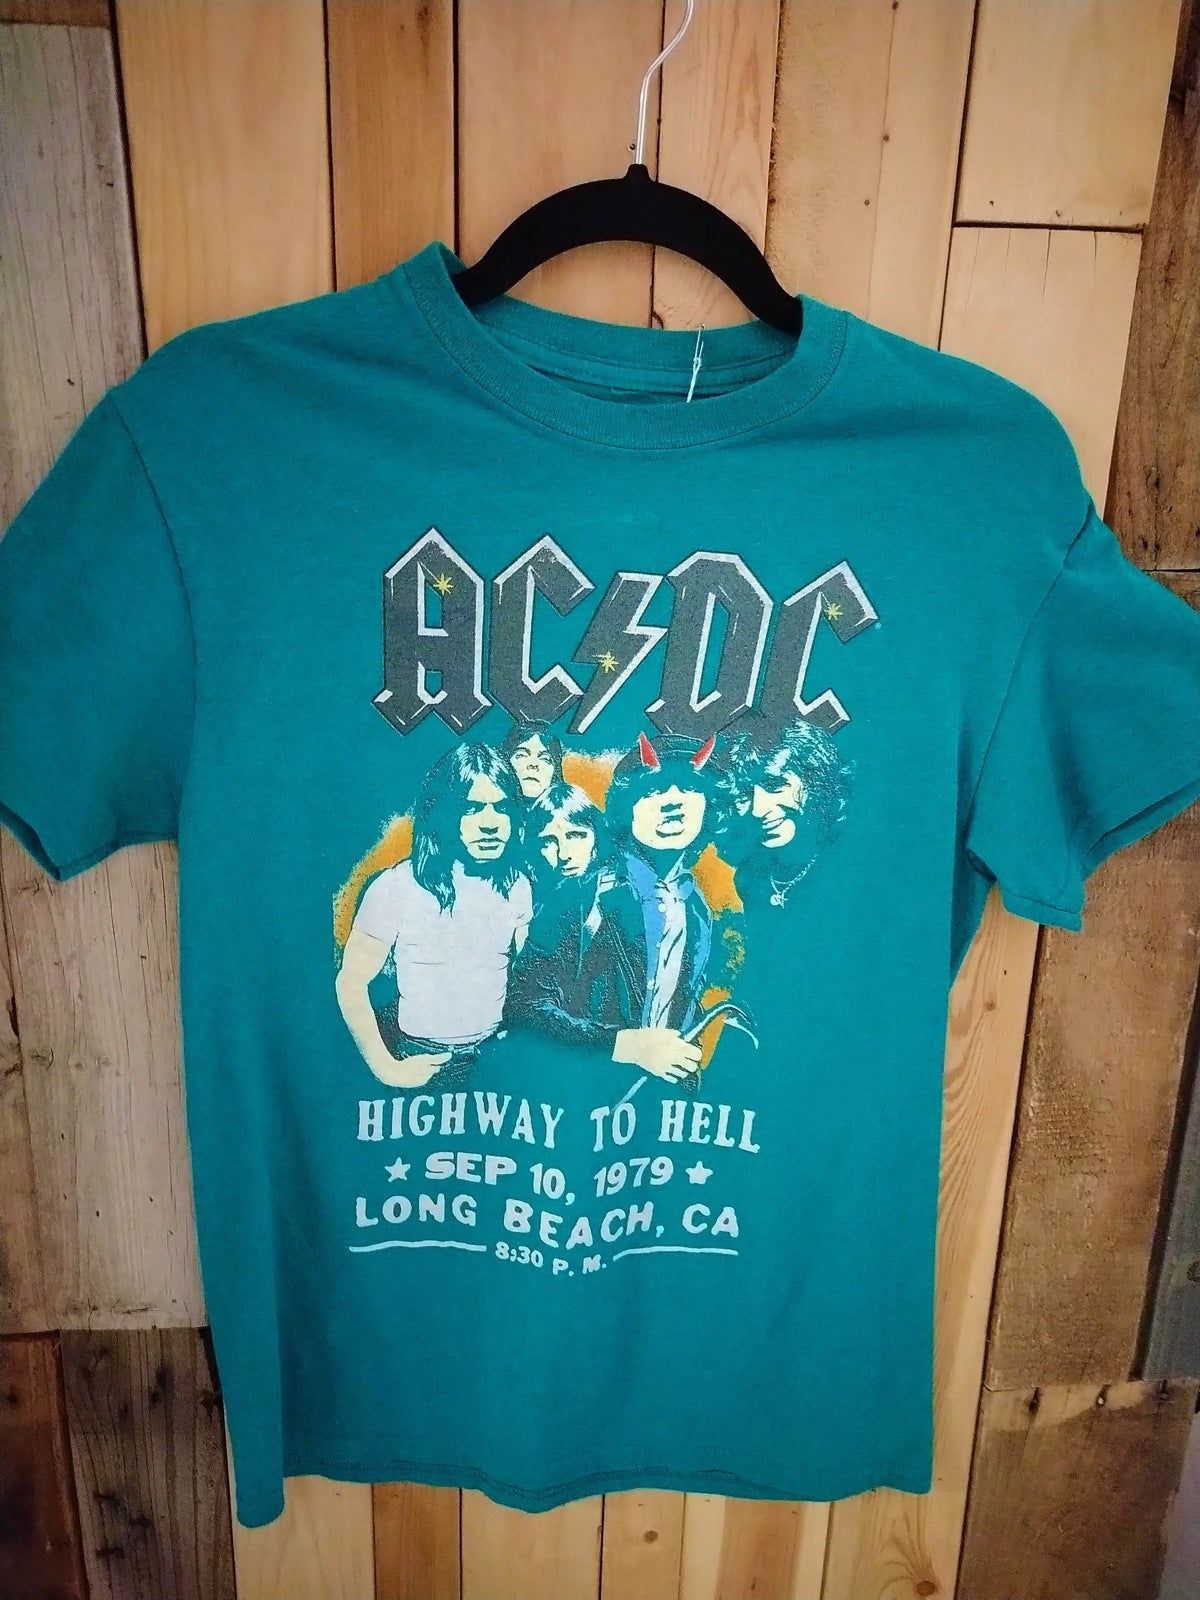 ACDC Official Merchandise "Highway to Hell" T Shirt Size Small by Goodie Two Sleeves